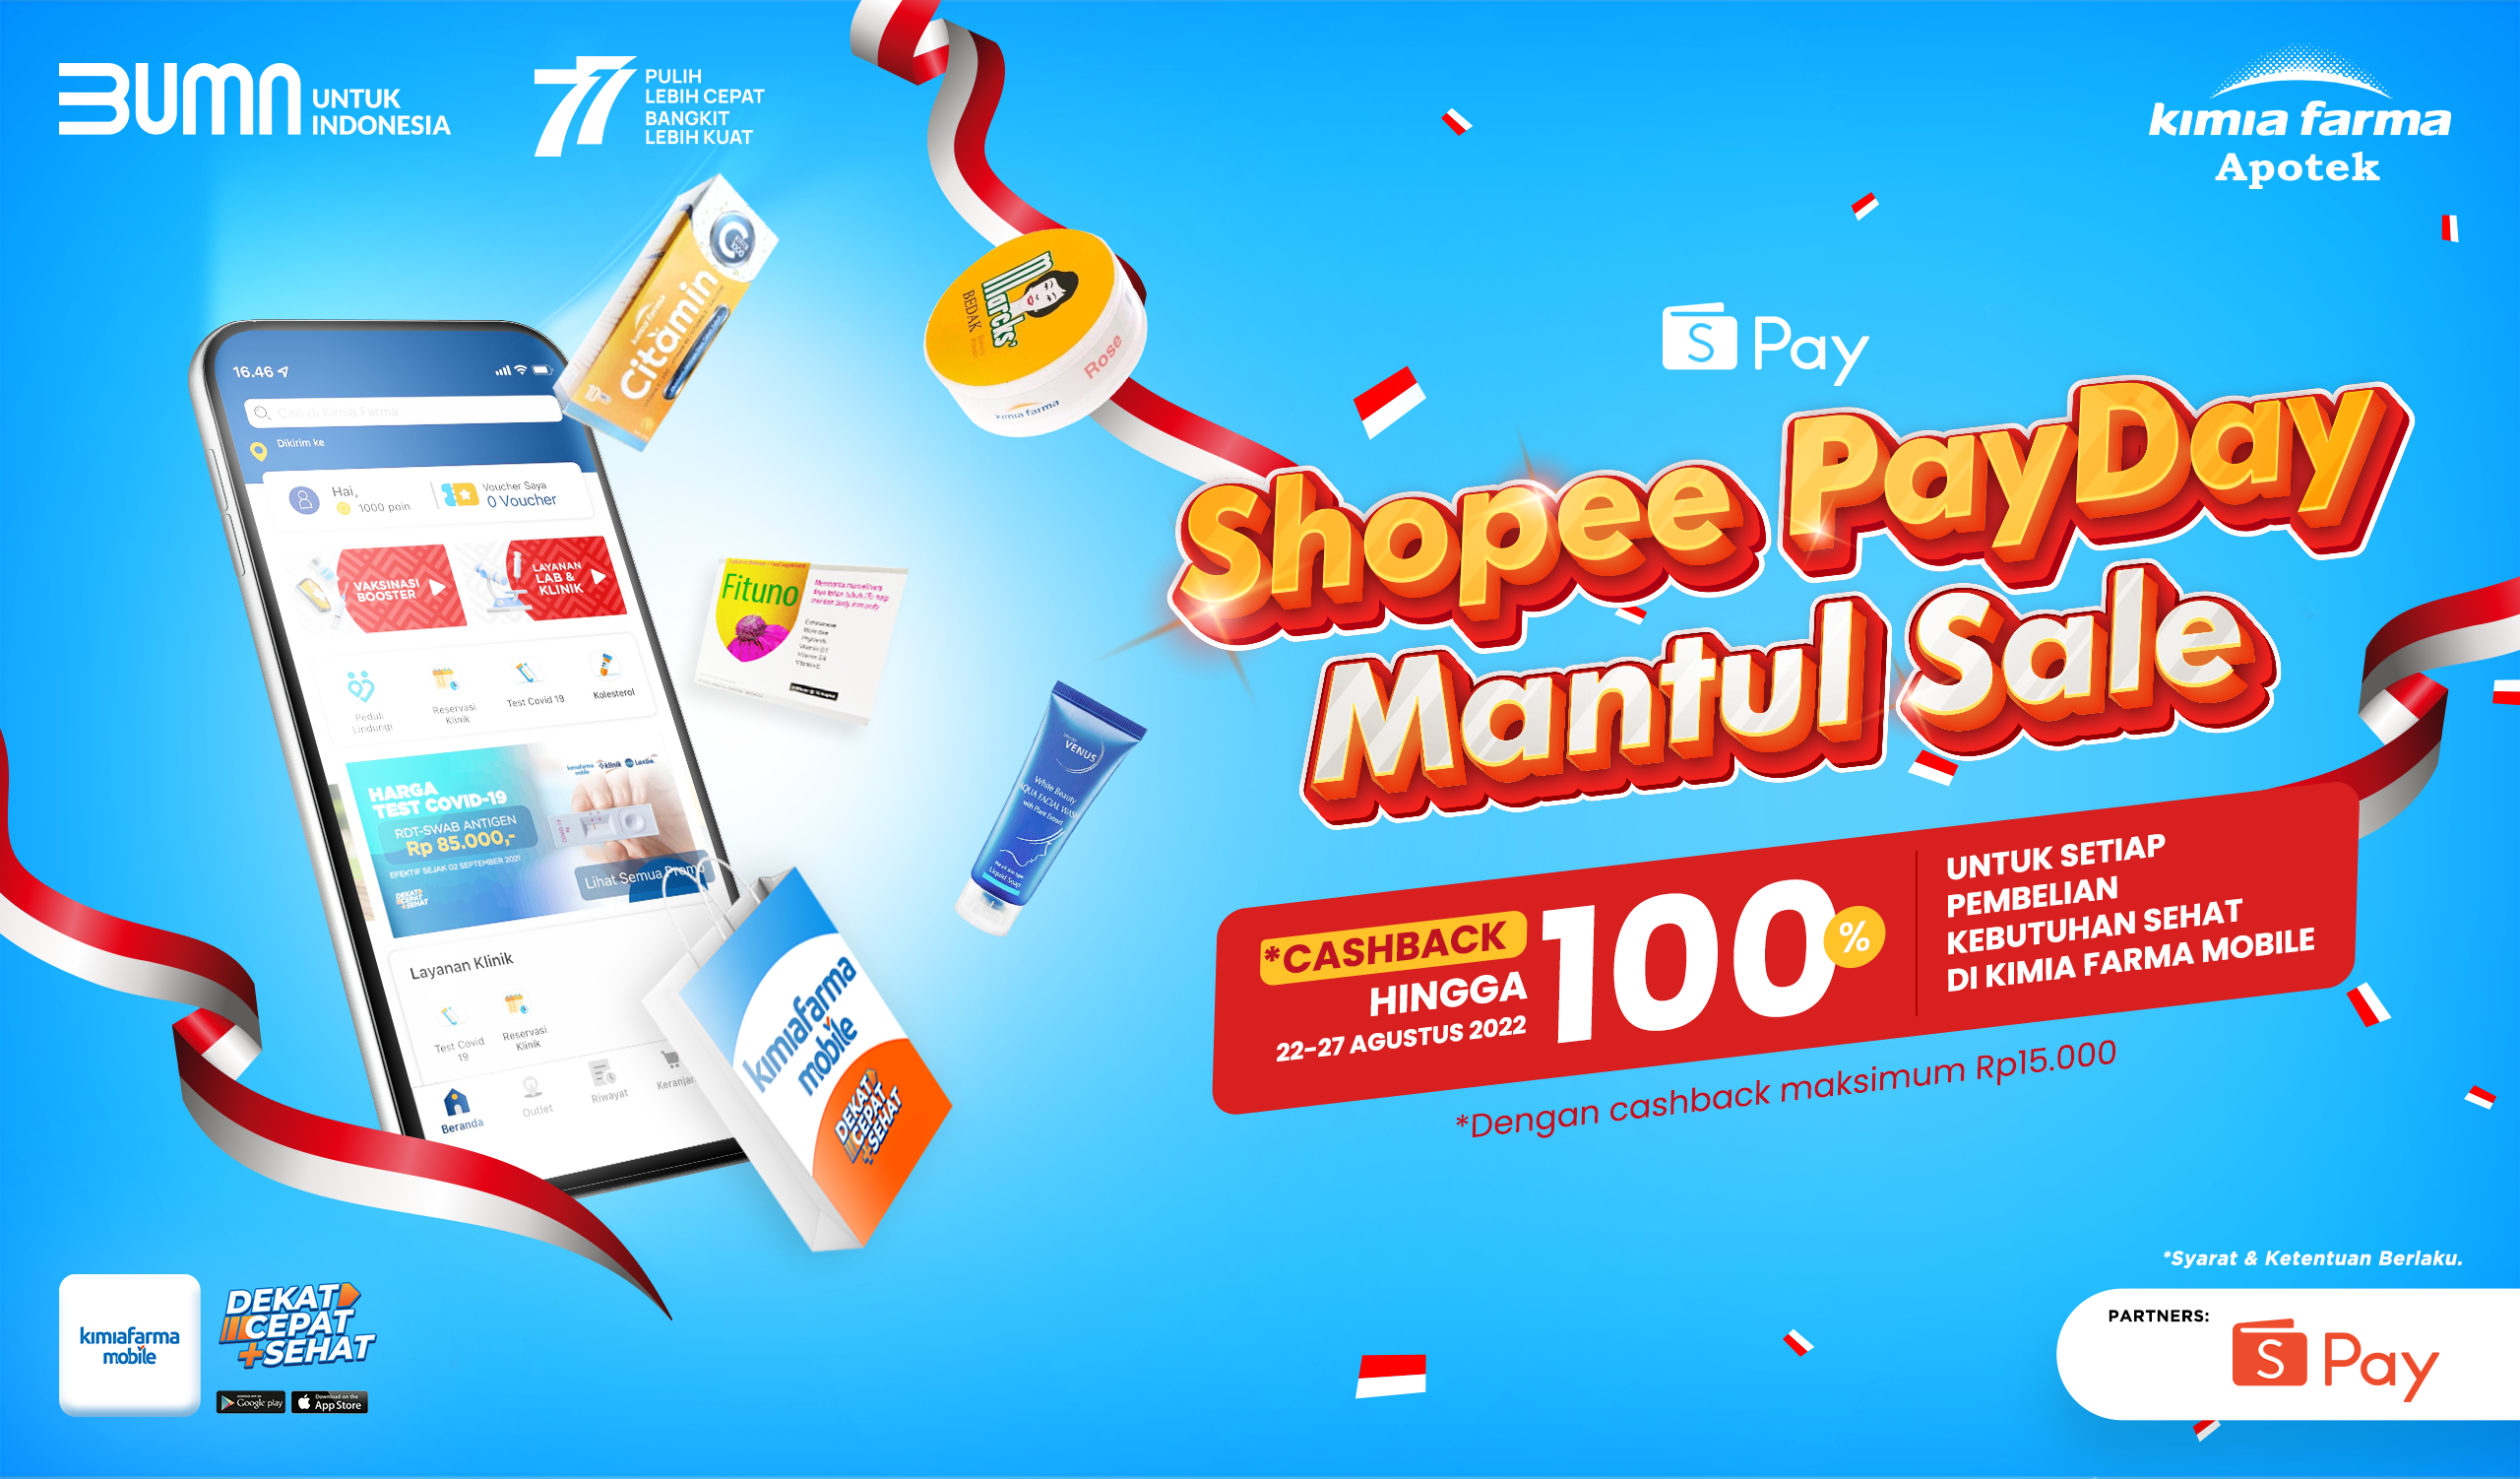 You are currently viewing Shopee PayDay Mantul Sale di Kimia Farma Mobile